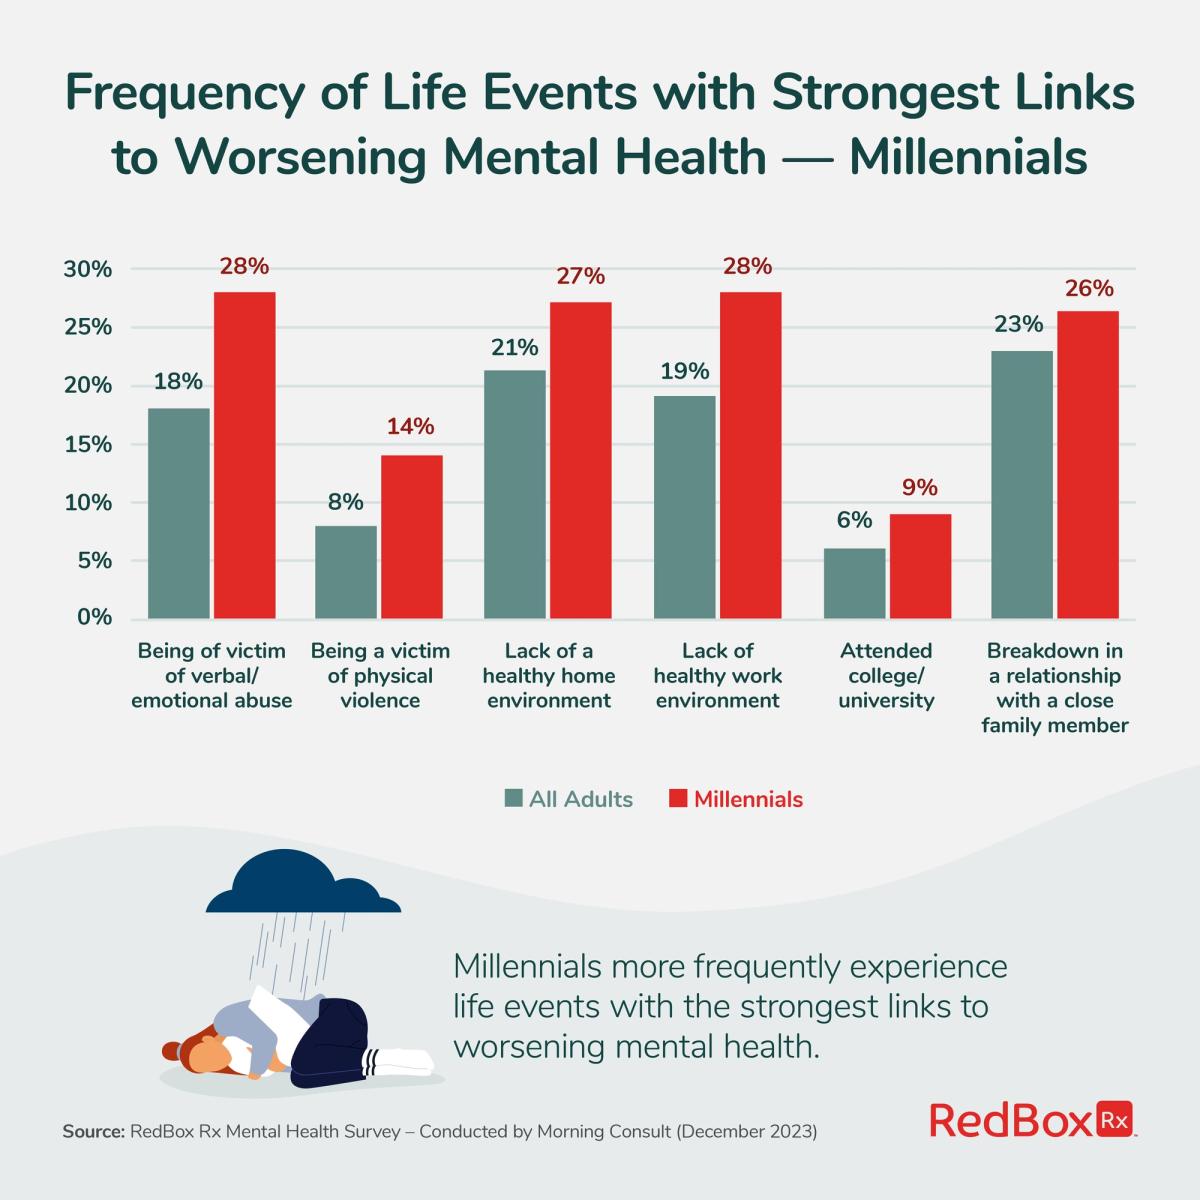 Millennials More Frequently Experience Life Events with Strongest Links to Worsening Mental Health